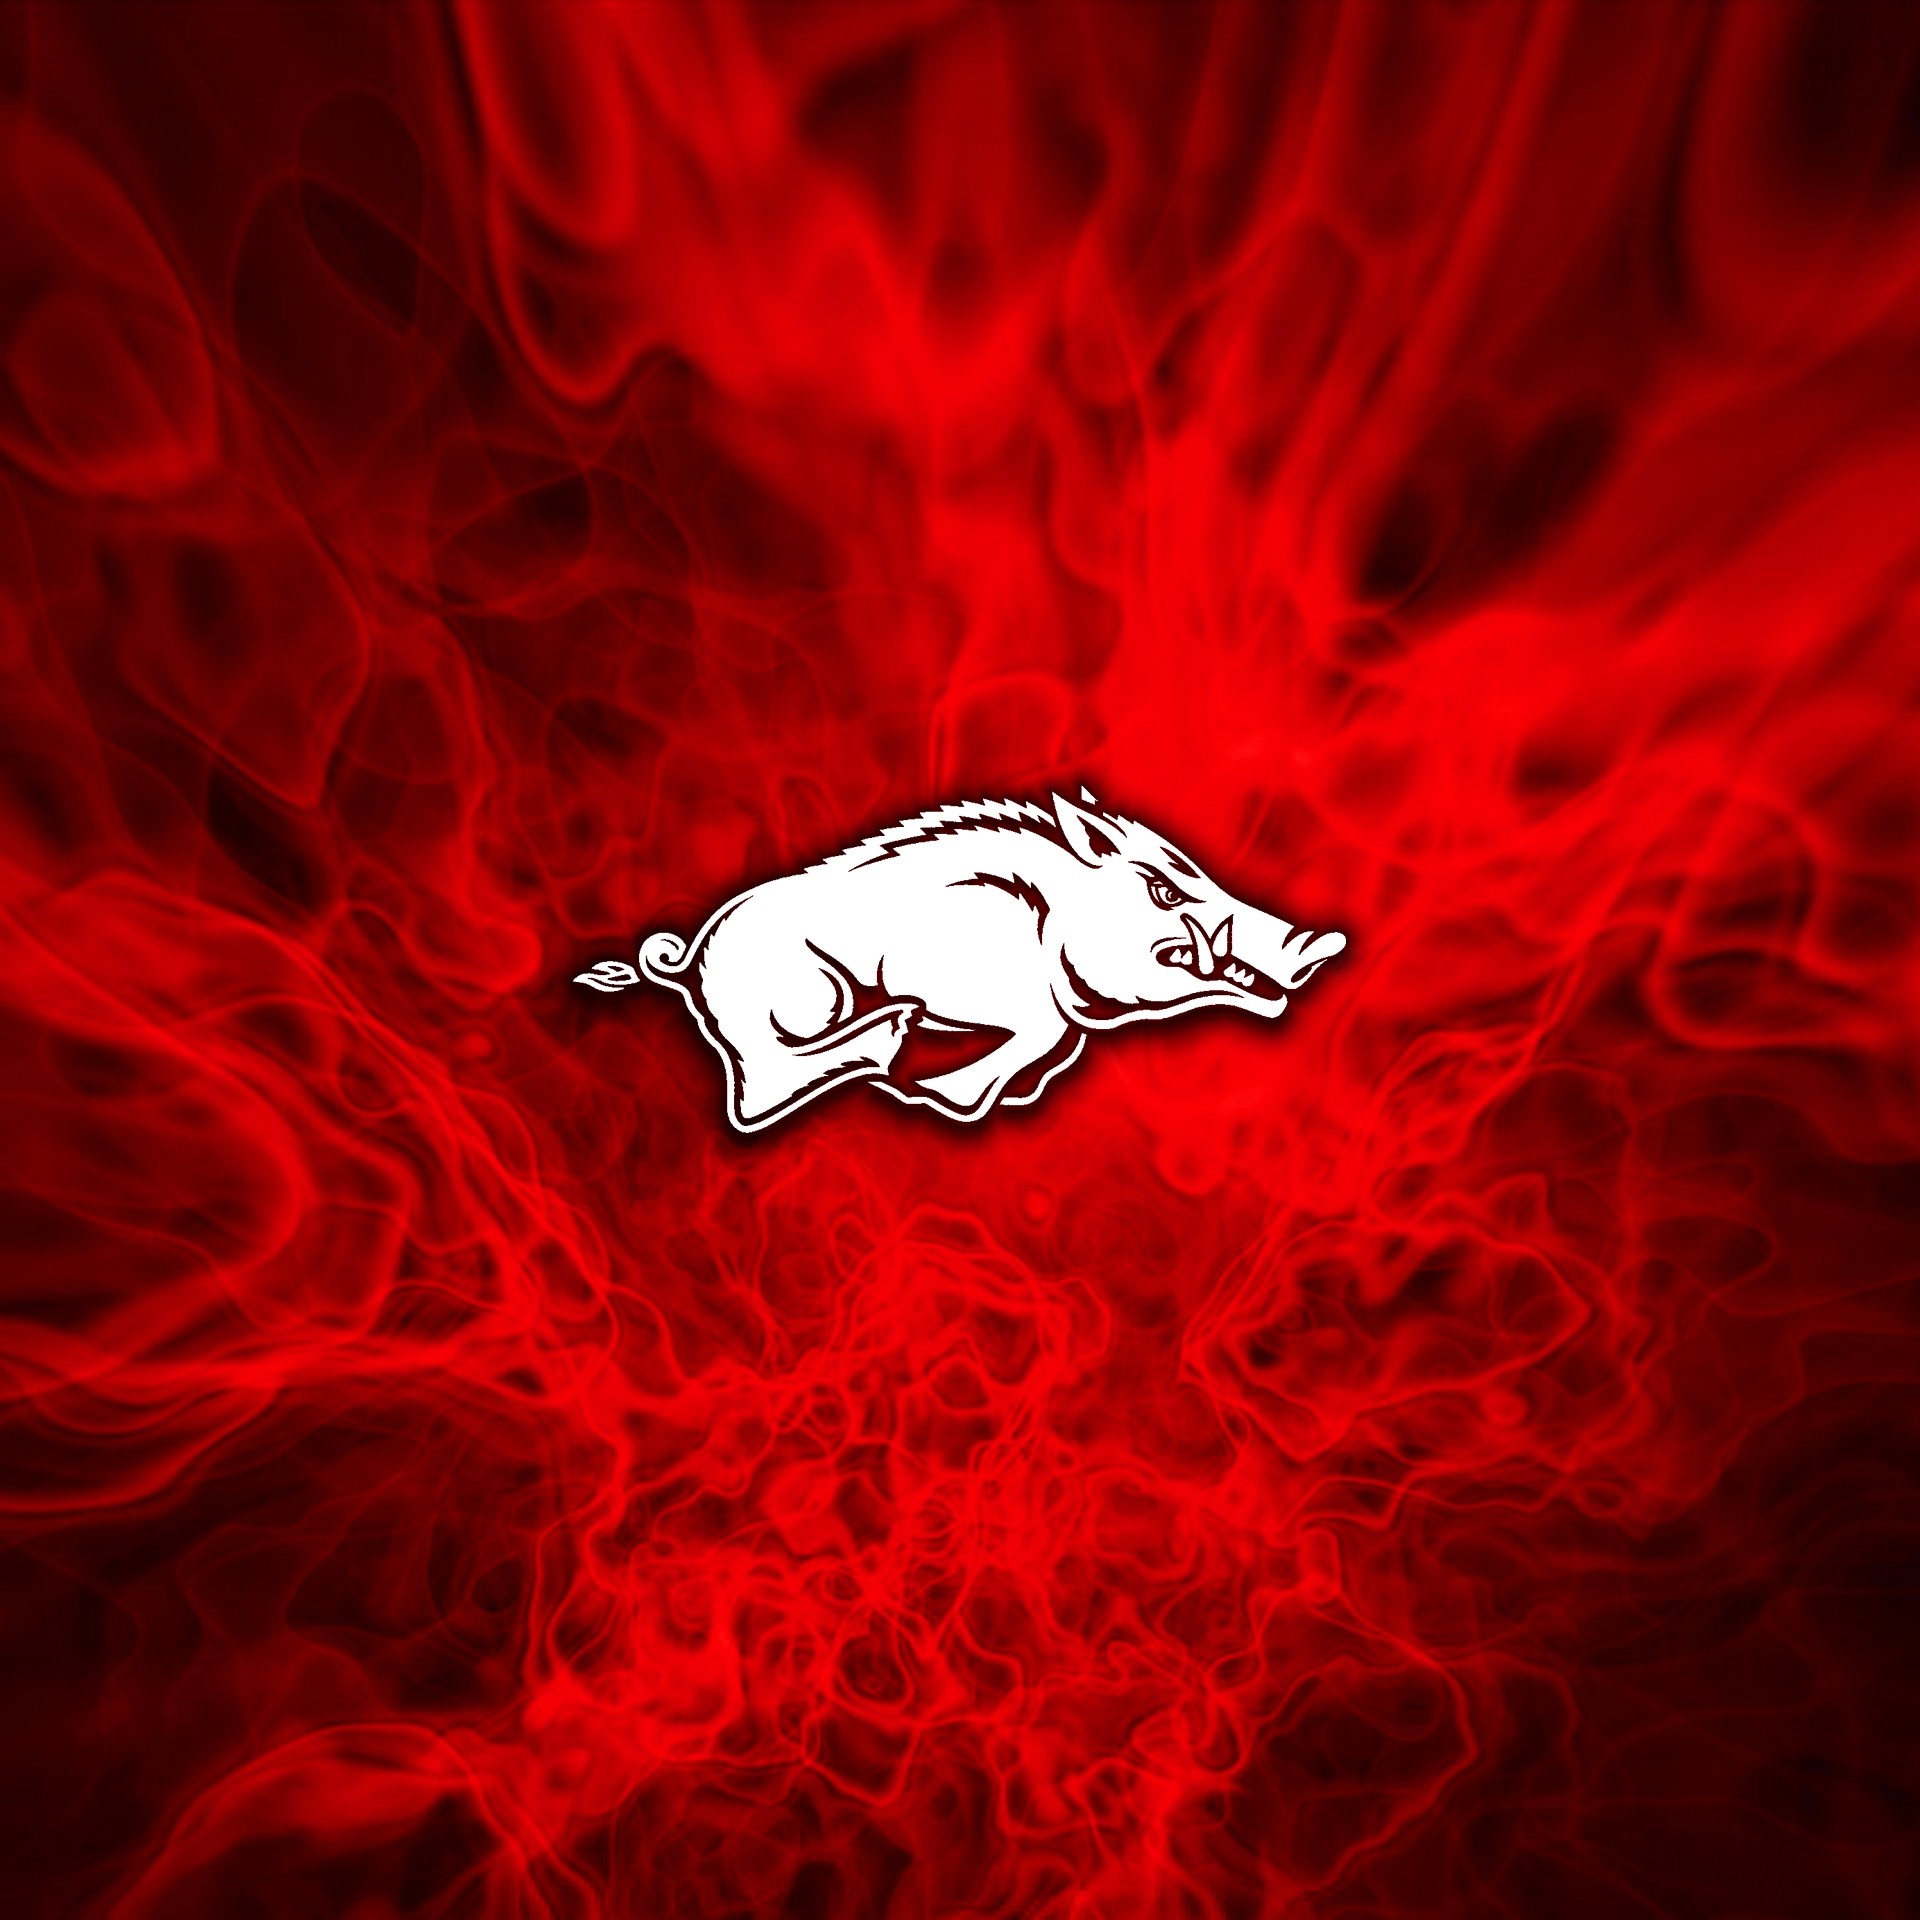 1920x1920 Flames Wallpaper by fatboy97 - Page 25 - Android Forums at .